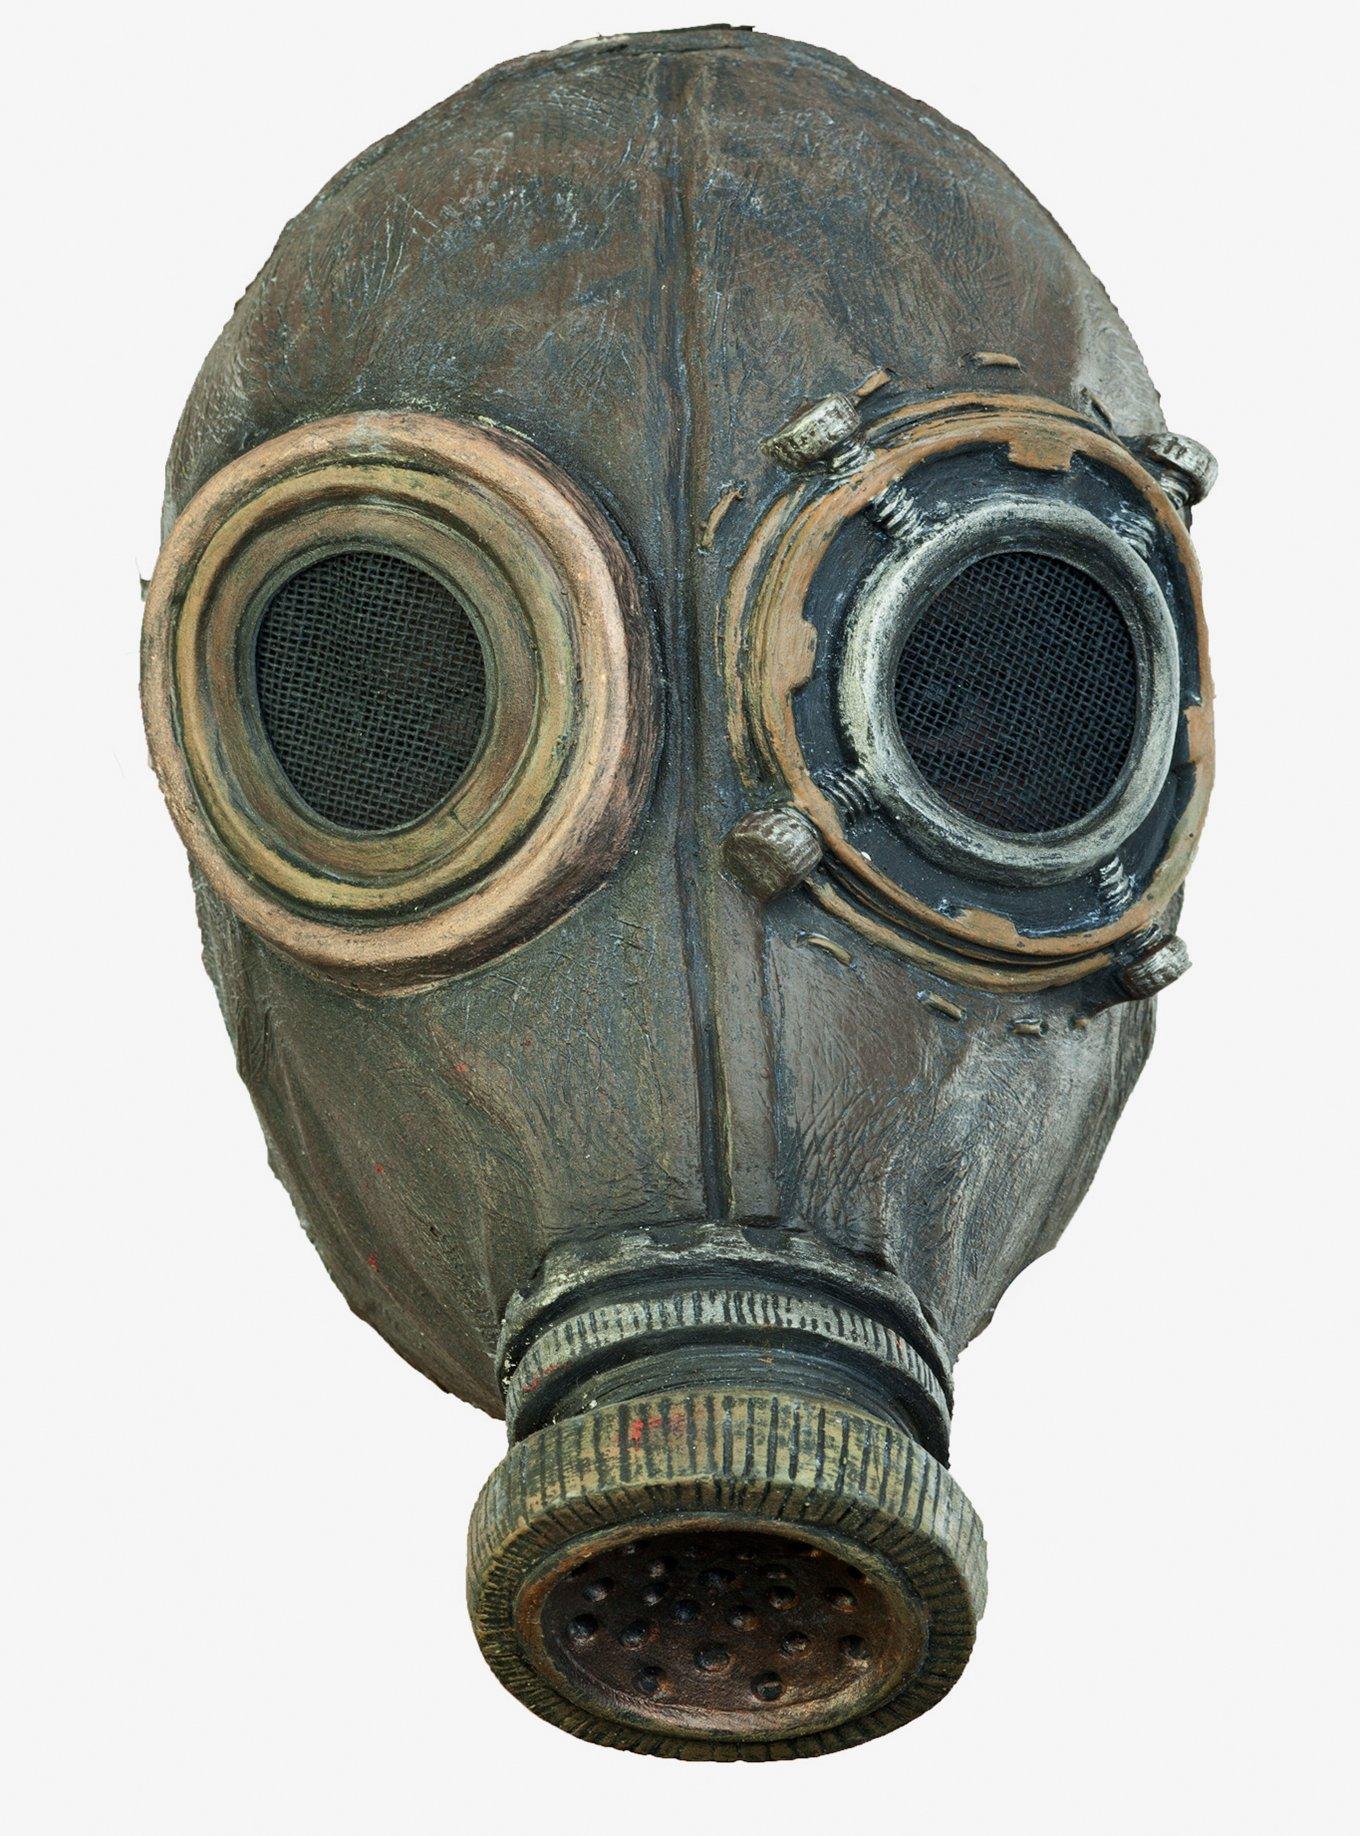 Wasted Gas Mask